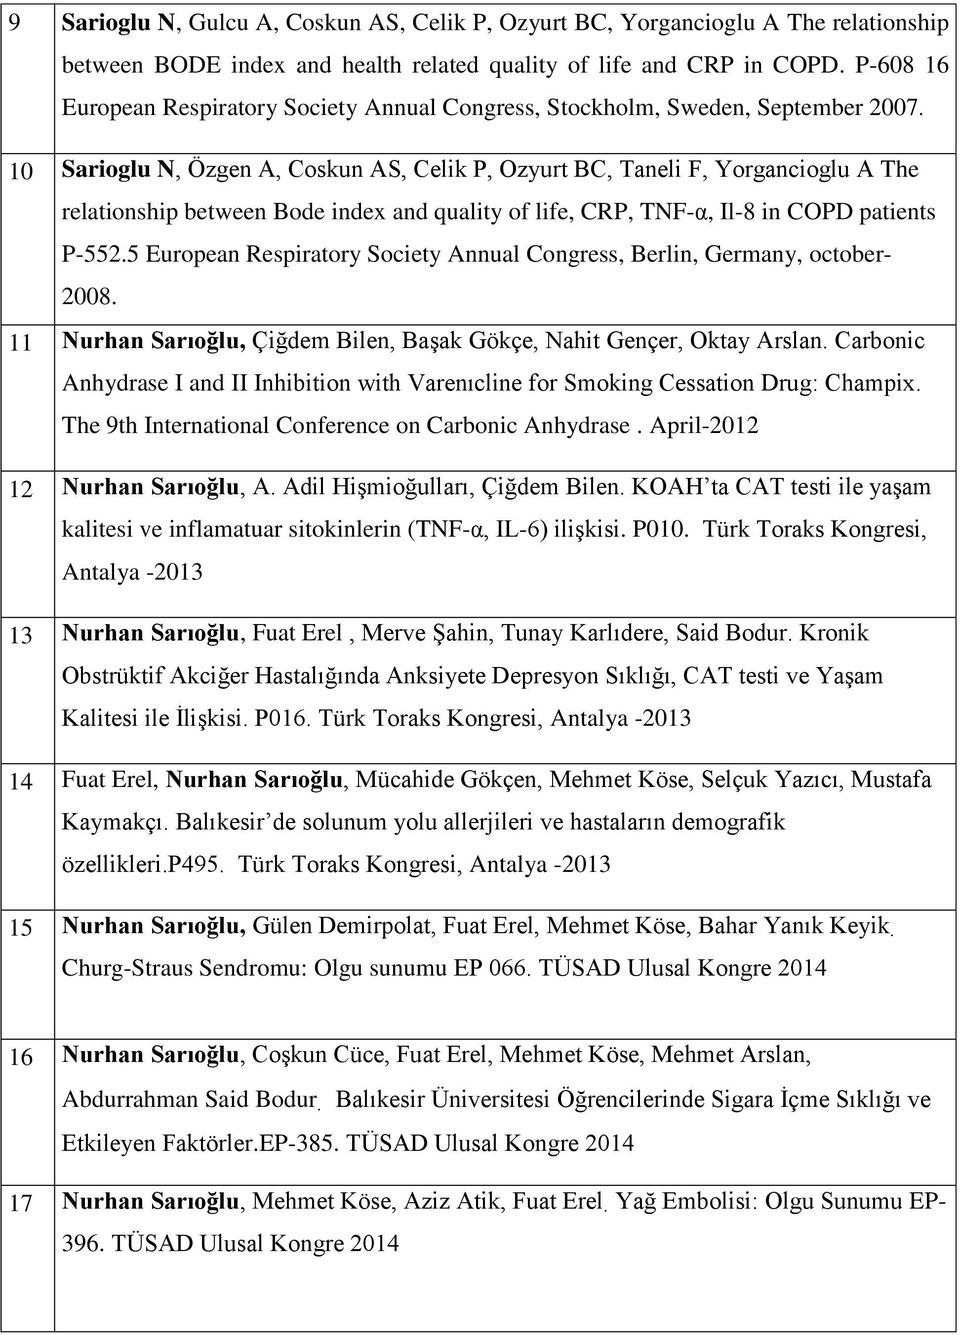 10 Sarioglu N, Özgen A, Coskun AS, Celik P, Ozyurt BC, Taneli F, Yorgancioglu A The relationship between Bode index and quality of life, CRP, TNF-α, Il-8 in COPD patients P-552.